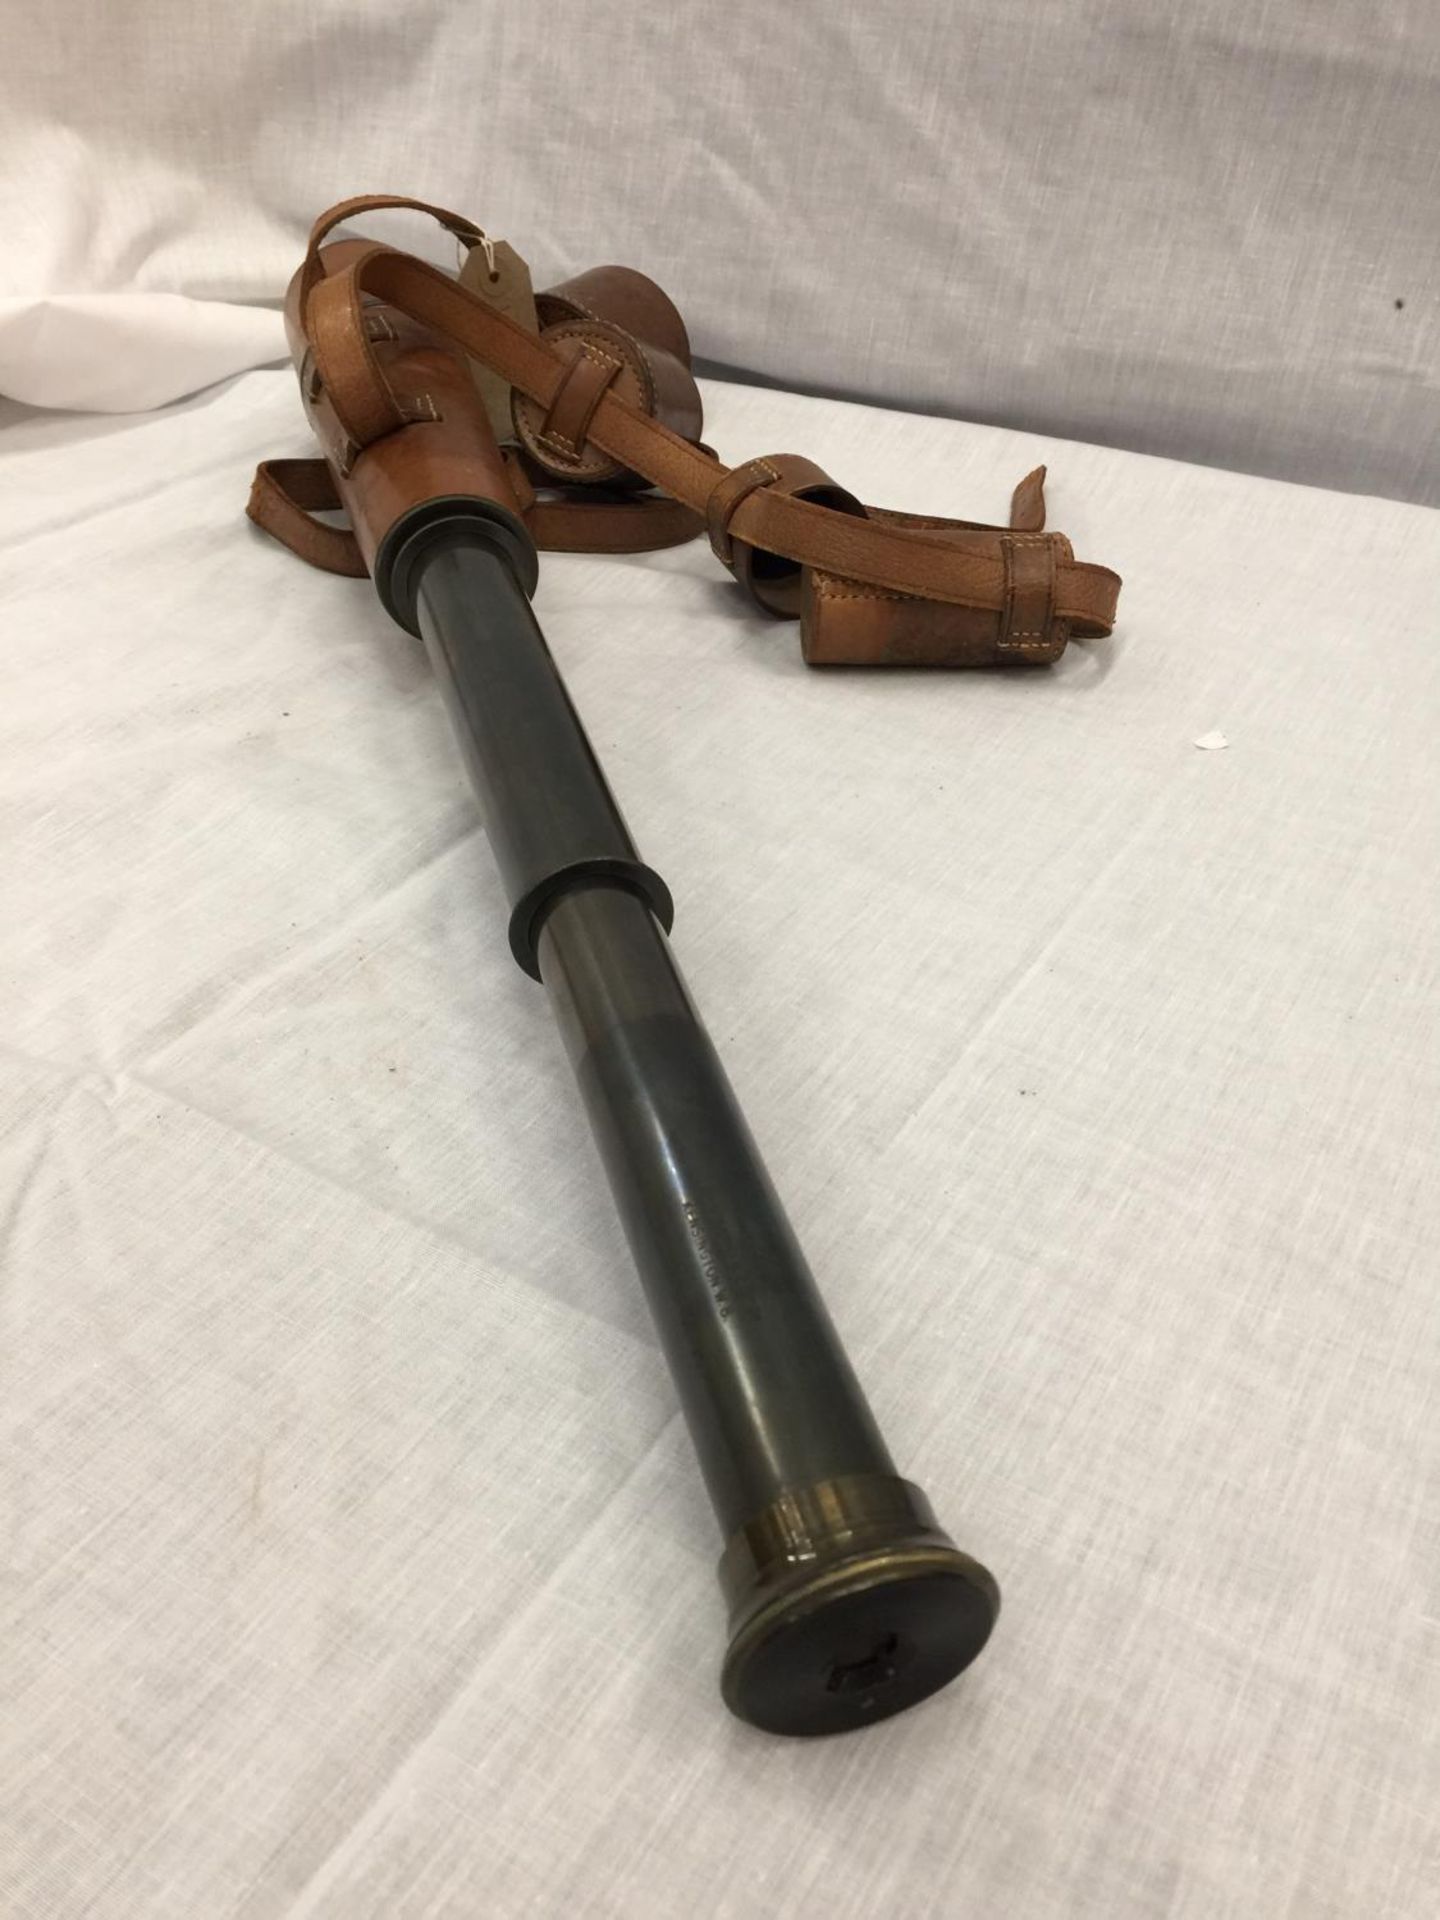 A VINTAGE BRASS AND LEATHER TELESCOPE RECONDITIONED FOR JOHN BARKER & CO LTD KENSINGTON W.8. BY - Image 7 of 16